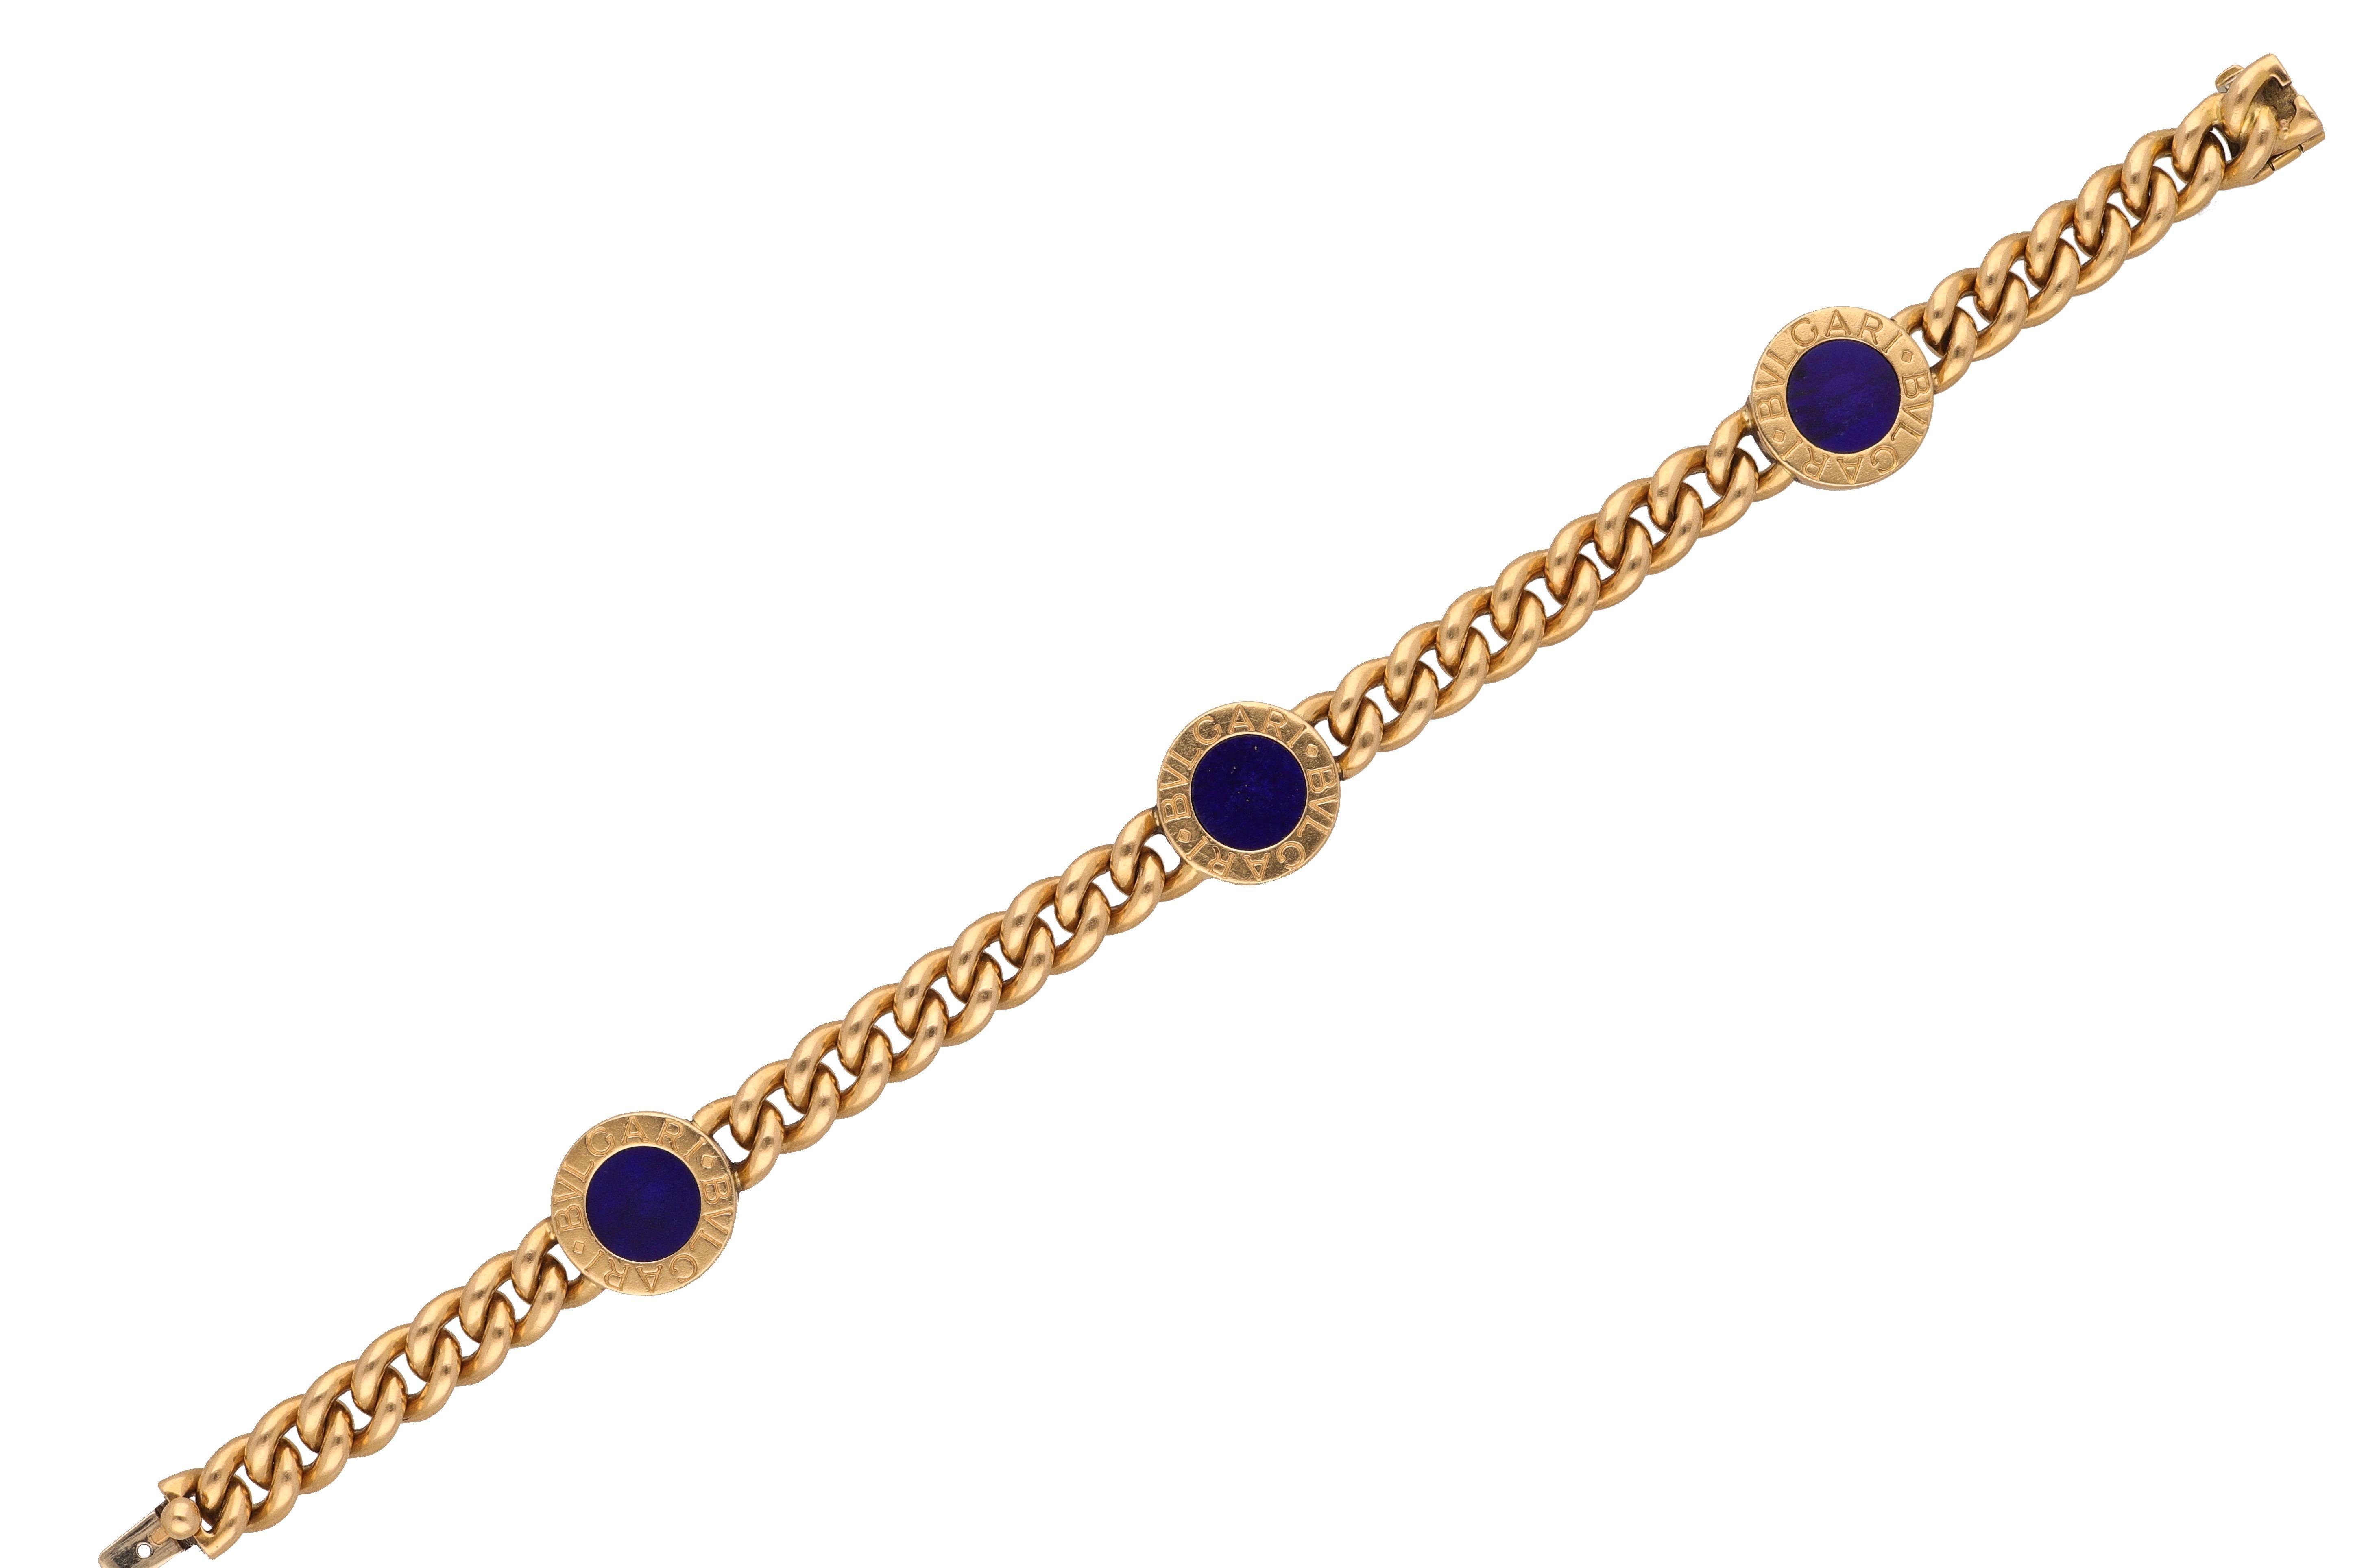 18 Kt. yellow gold bracelet with 3 round-cut lapis, BULGARI BULGARI collection.
Elegant and classic, this bracelet can be suitable for every occasion.
Comes in the original box.